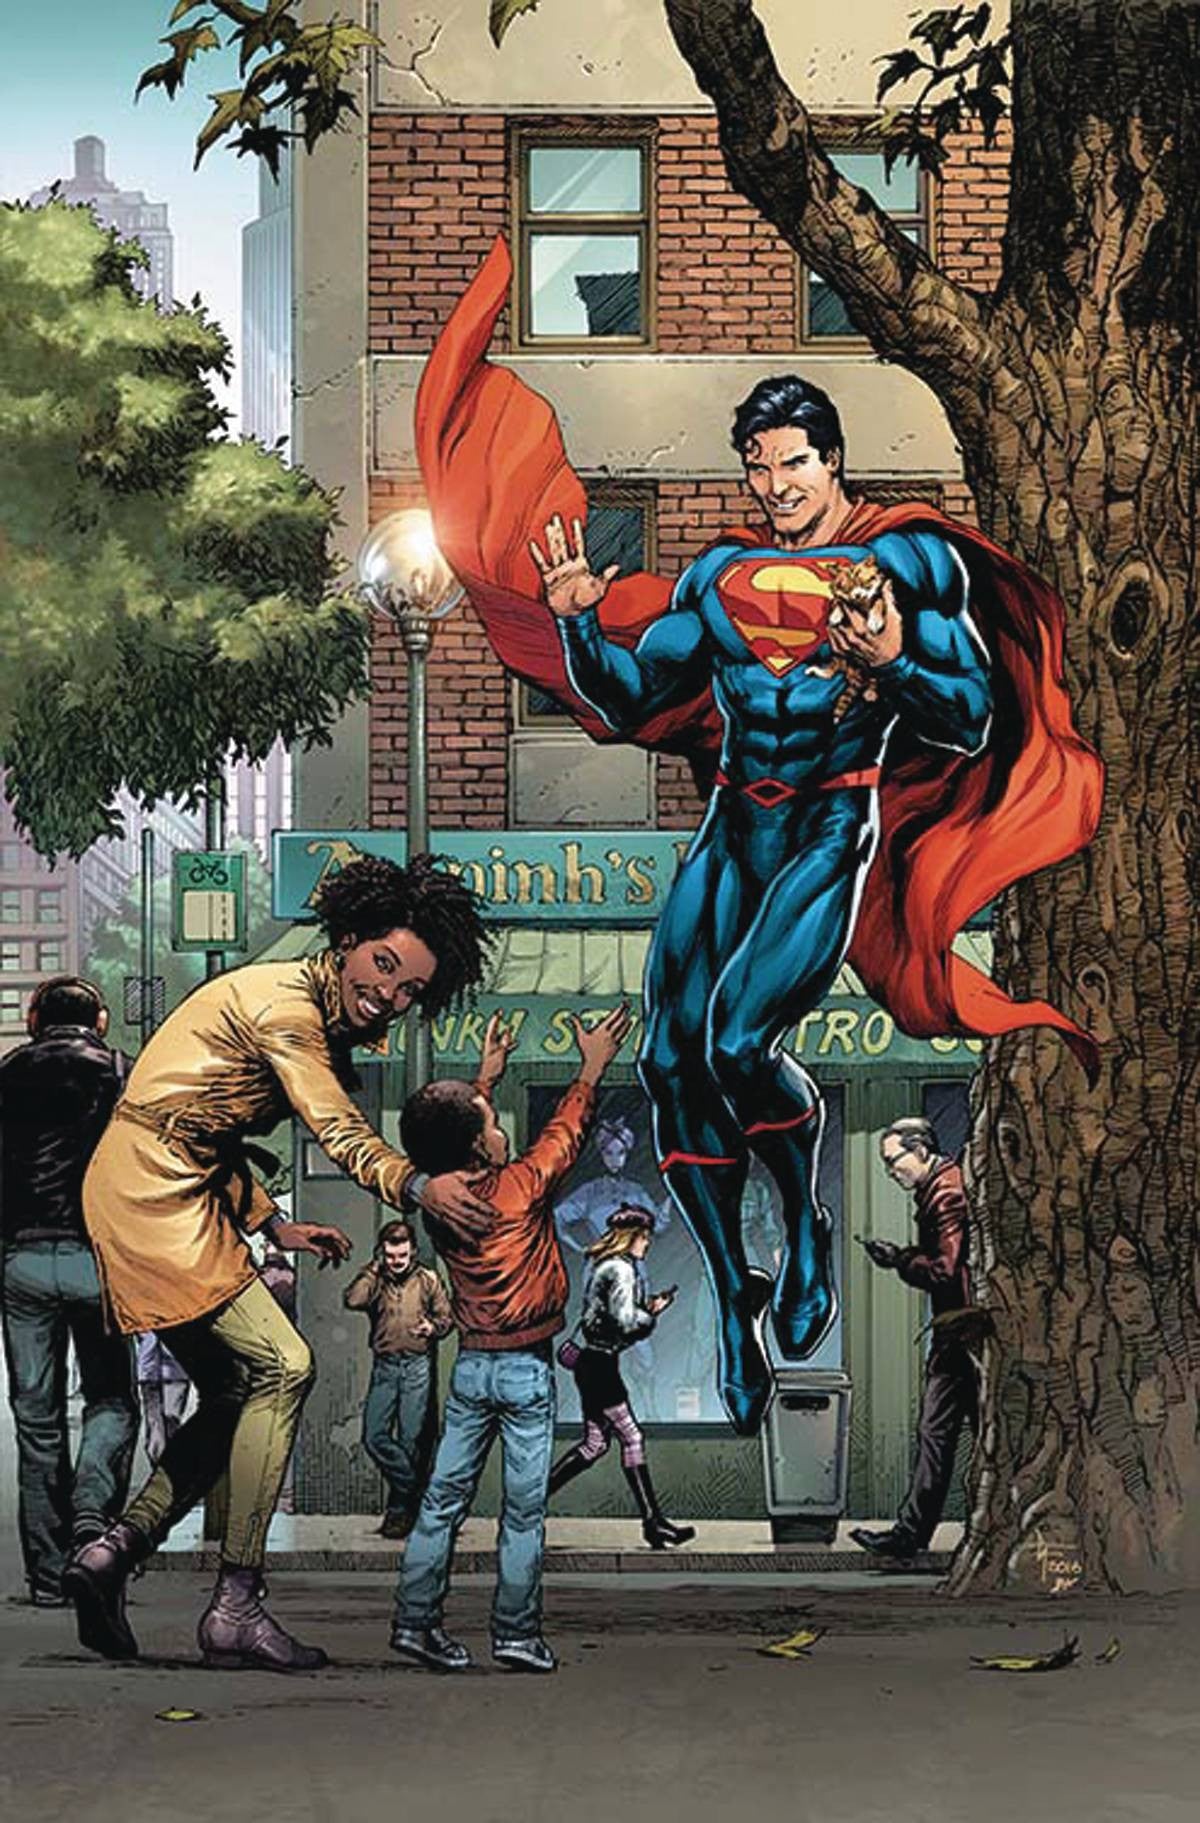 ACTION COMICS #972 VAR ED COVER